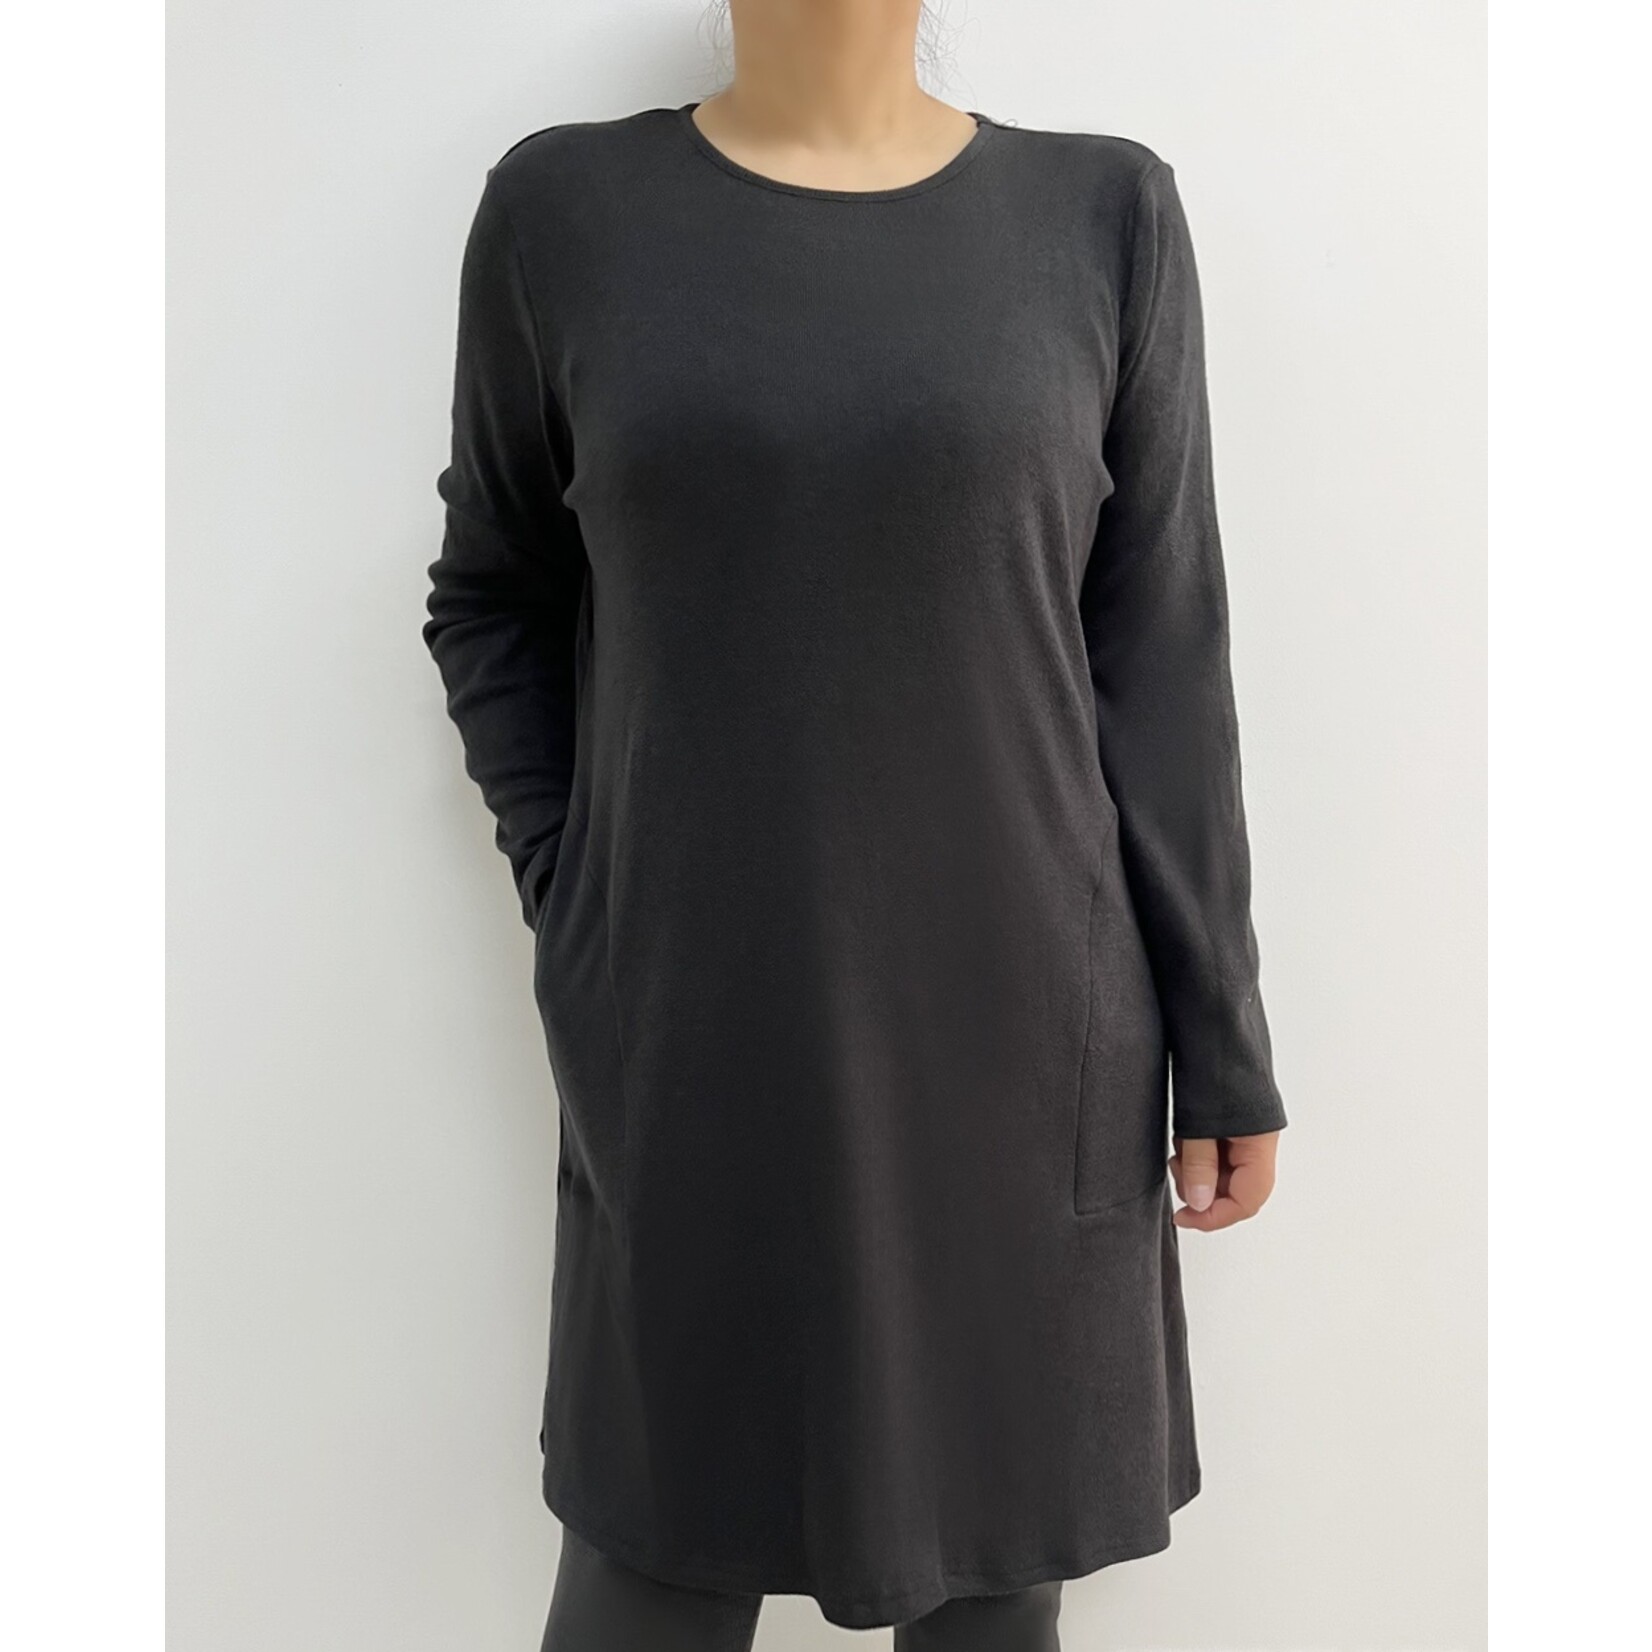 Creations ladies long sleeve plain dress with side pockets